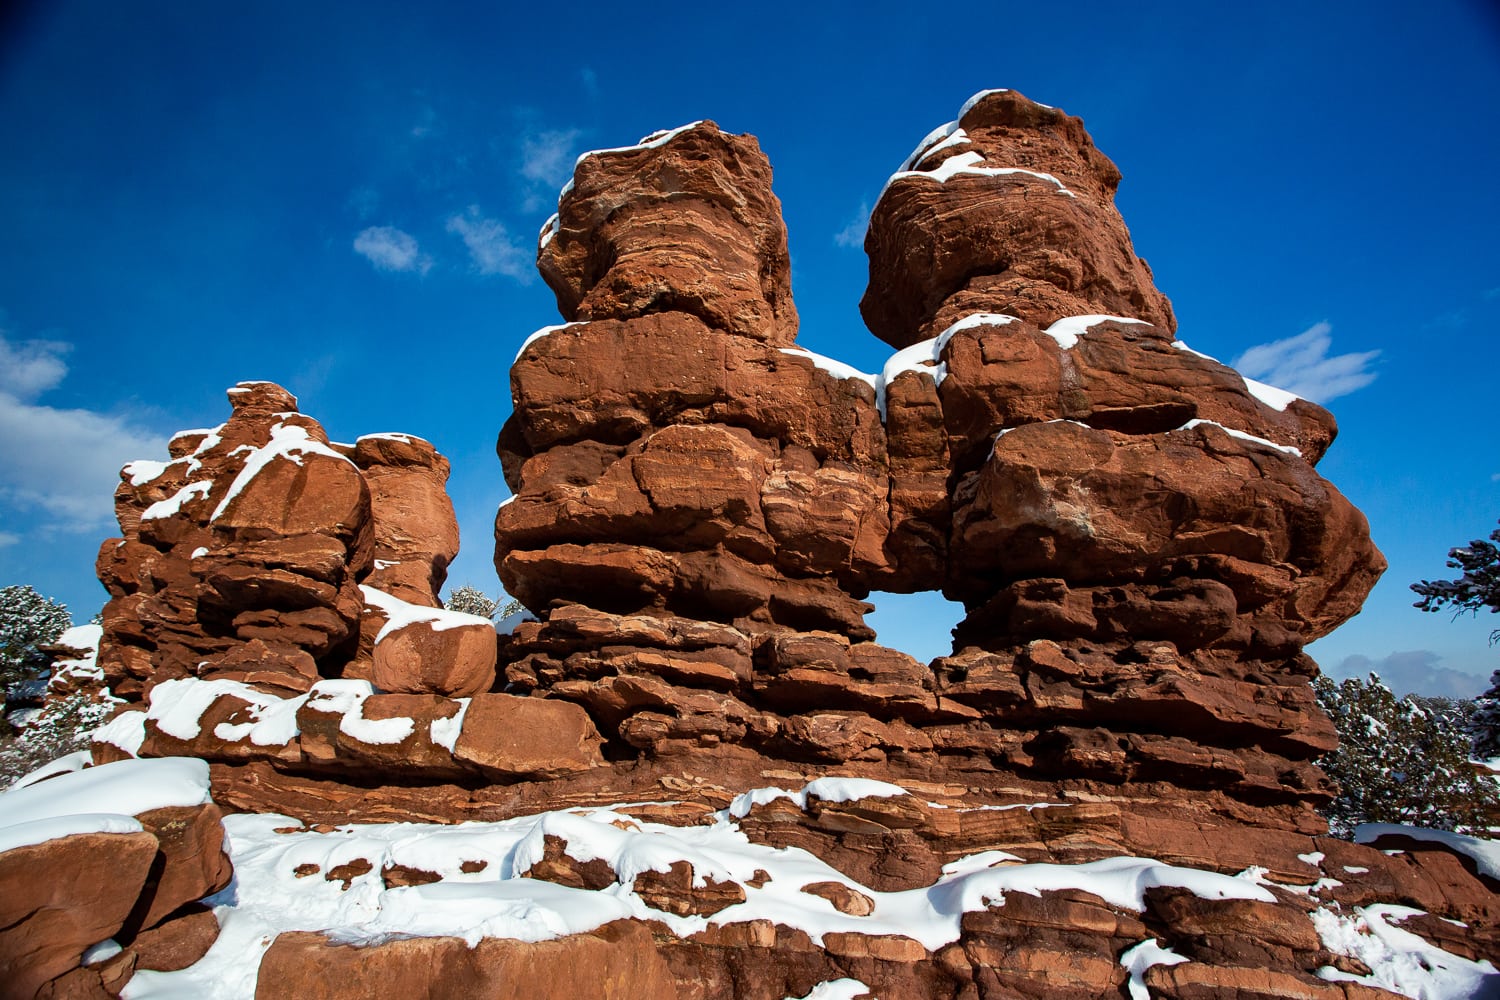 Snow on the siamese twins rock formations at Garden of the Gods.